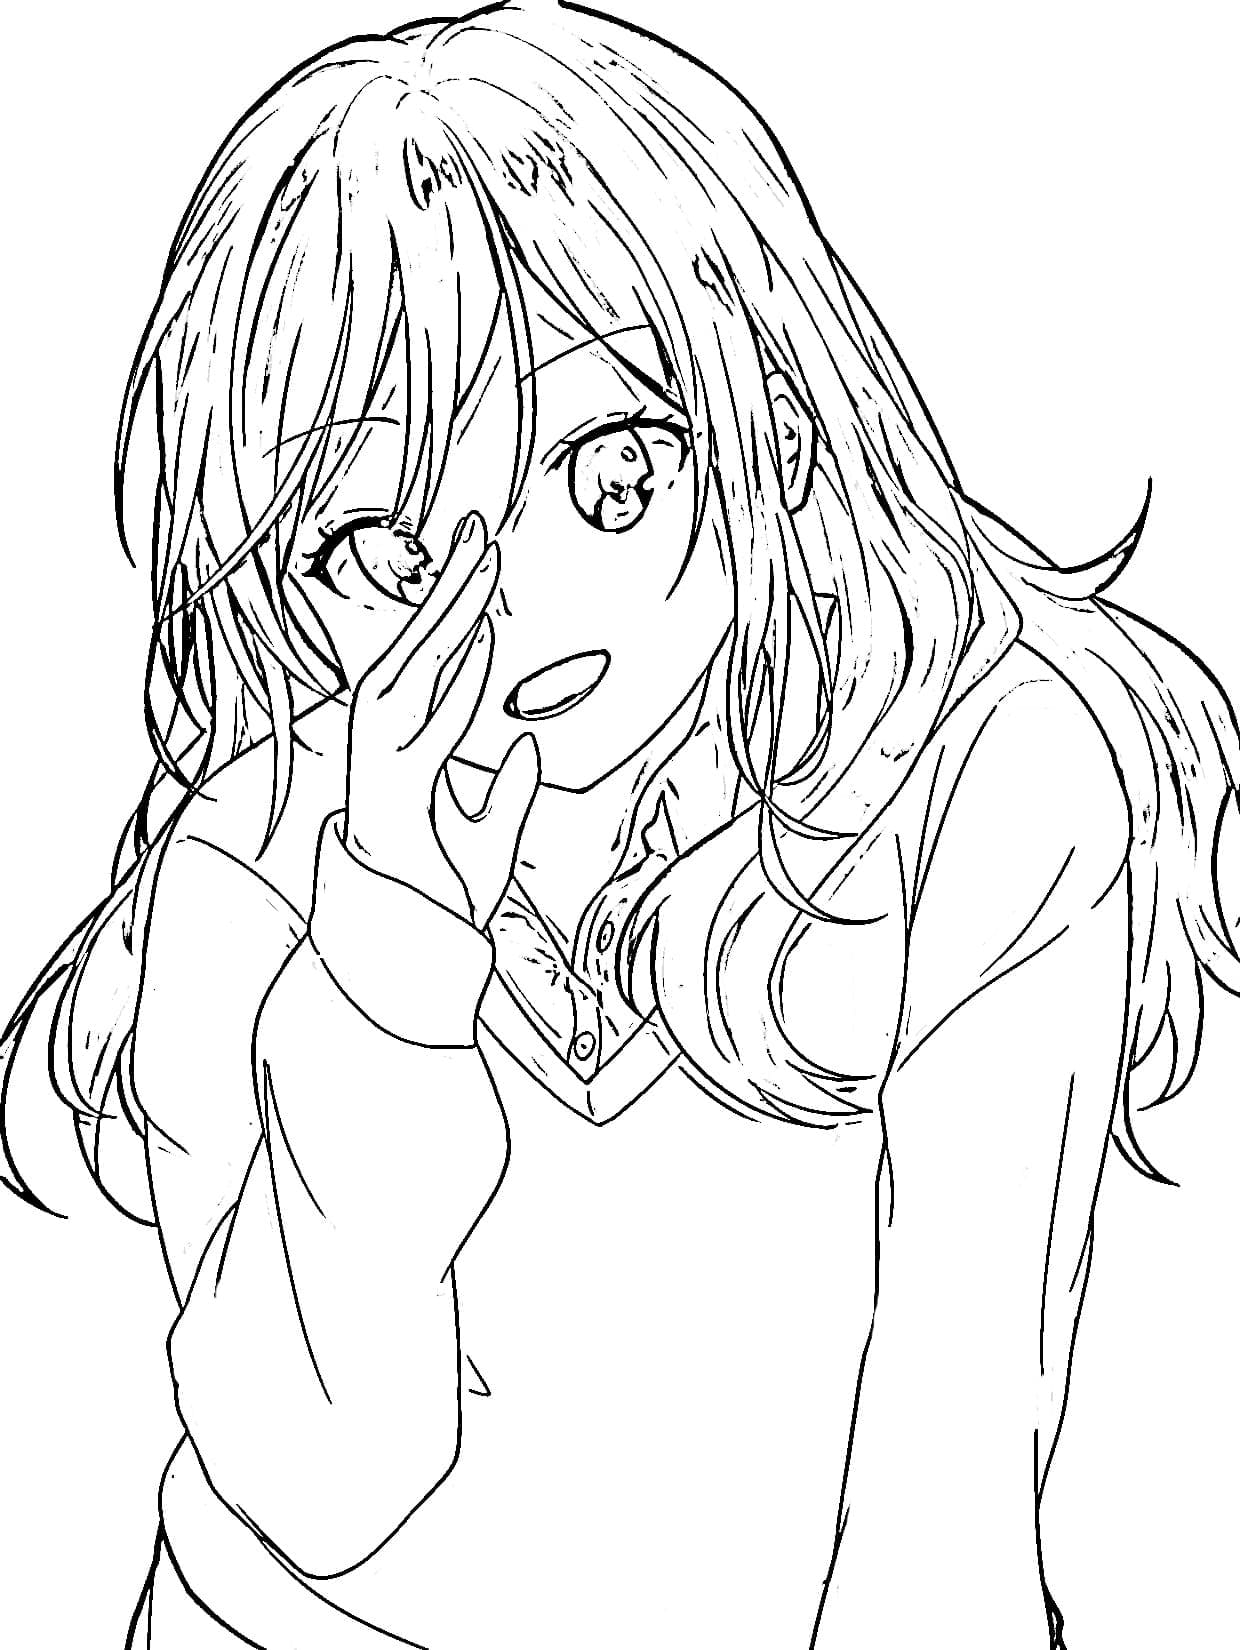 Kyouko Hori coloring page - Download, Print or Color Online for Free